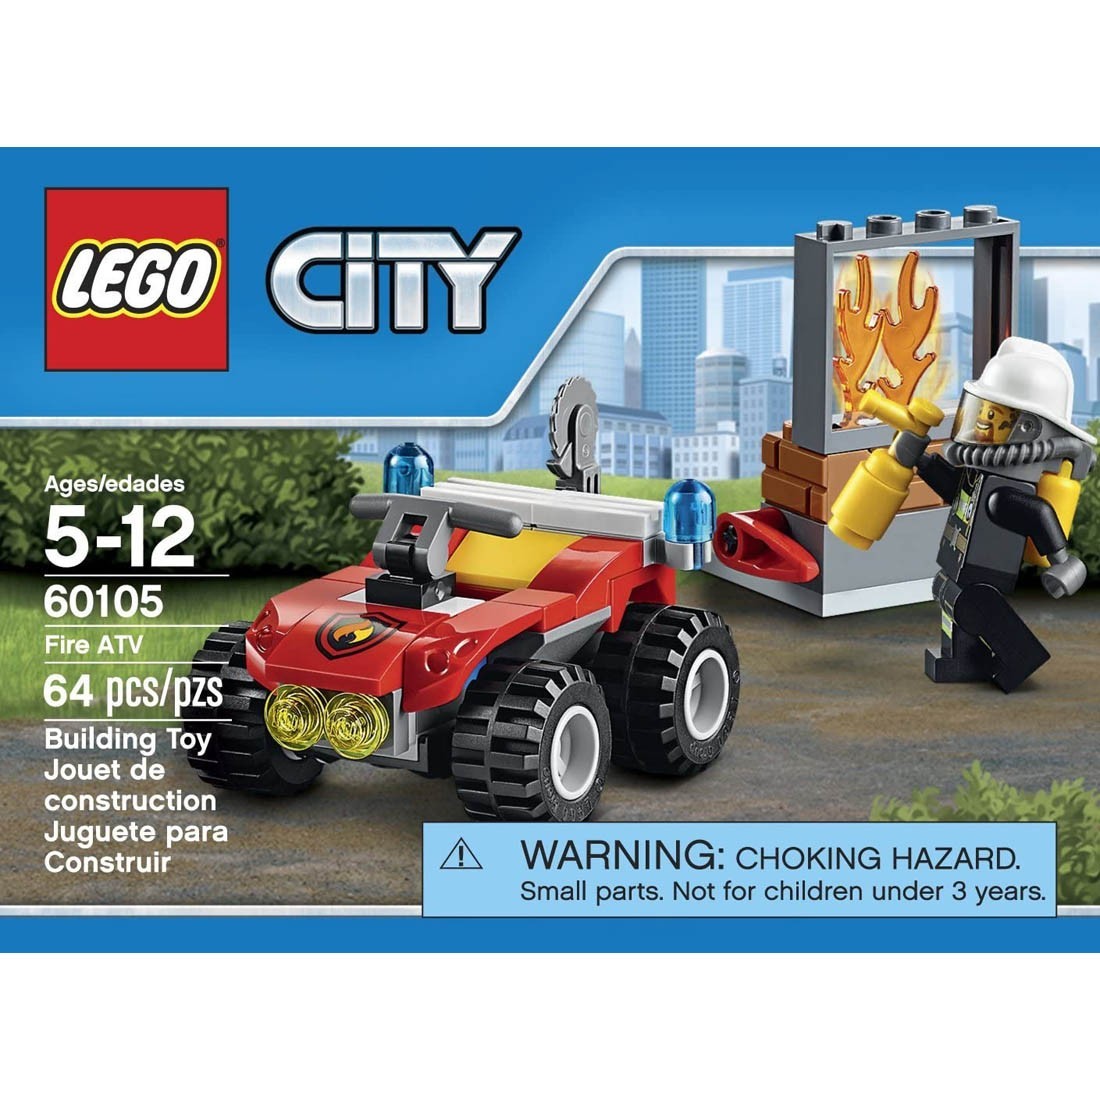 Shop LEGO City Fire ATV Mixed - LEGO, delivered to your home | TheOutfit